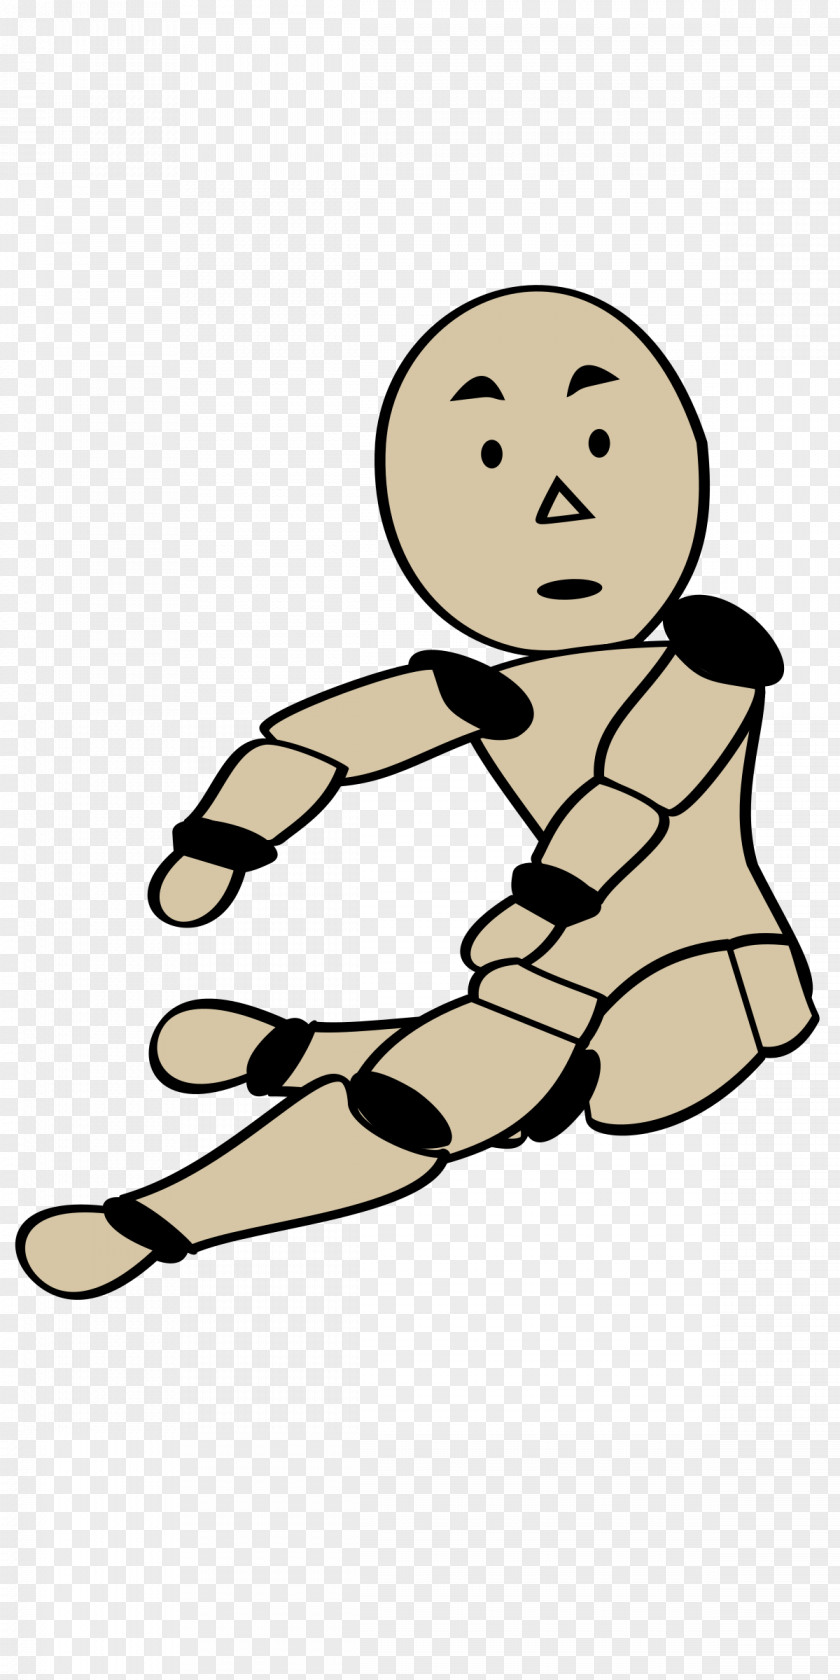 Q Version Of The Figure Clip Art PNG